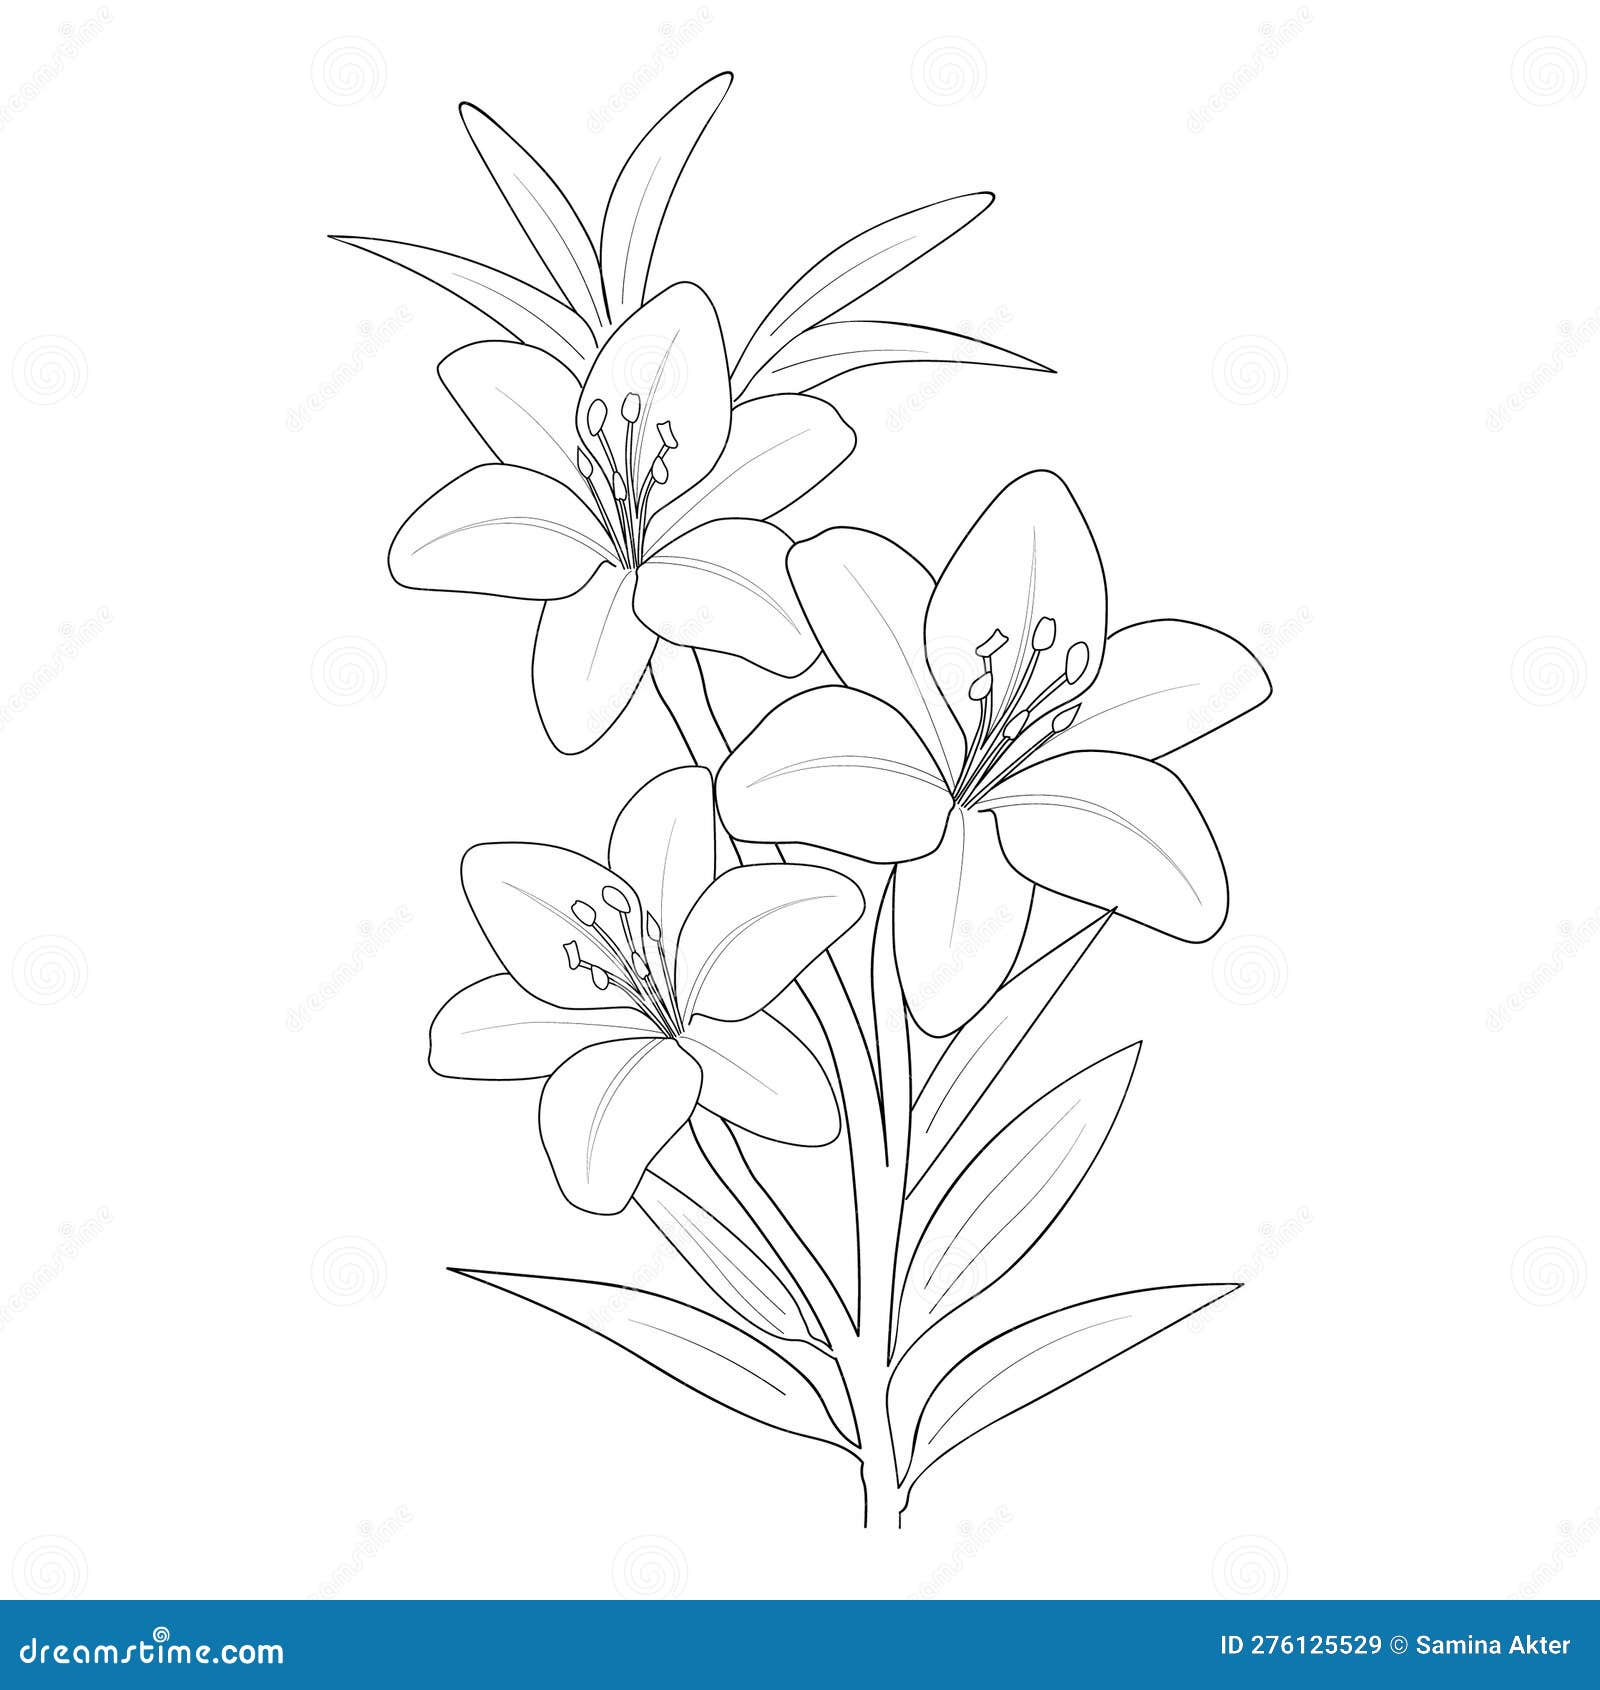 Sketch Lily Flower Drawing, Sketch Lily Flower Drawing, Tattoo Sketch ...